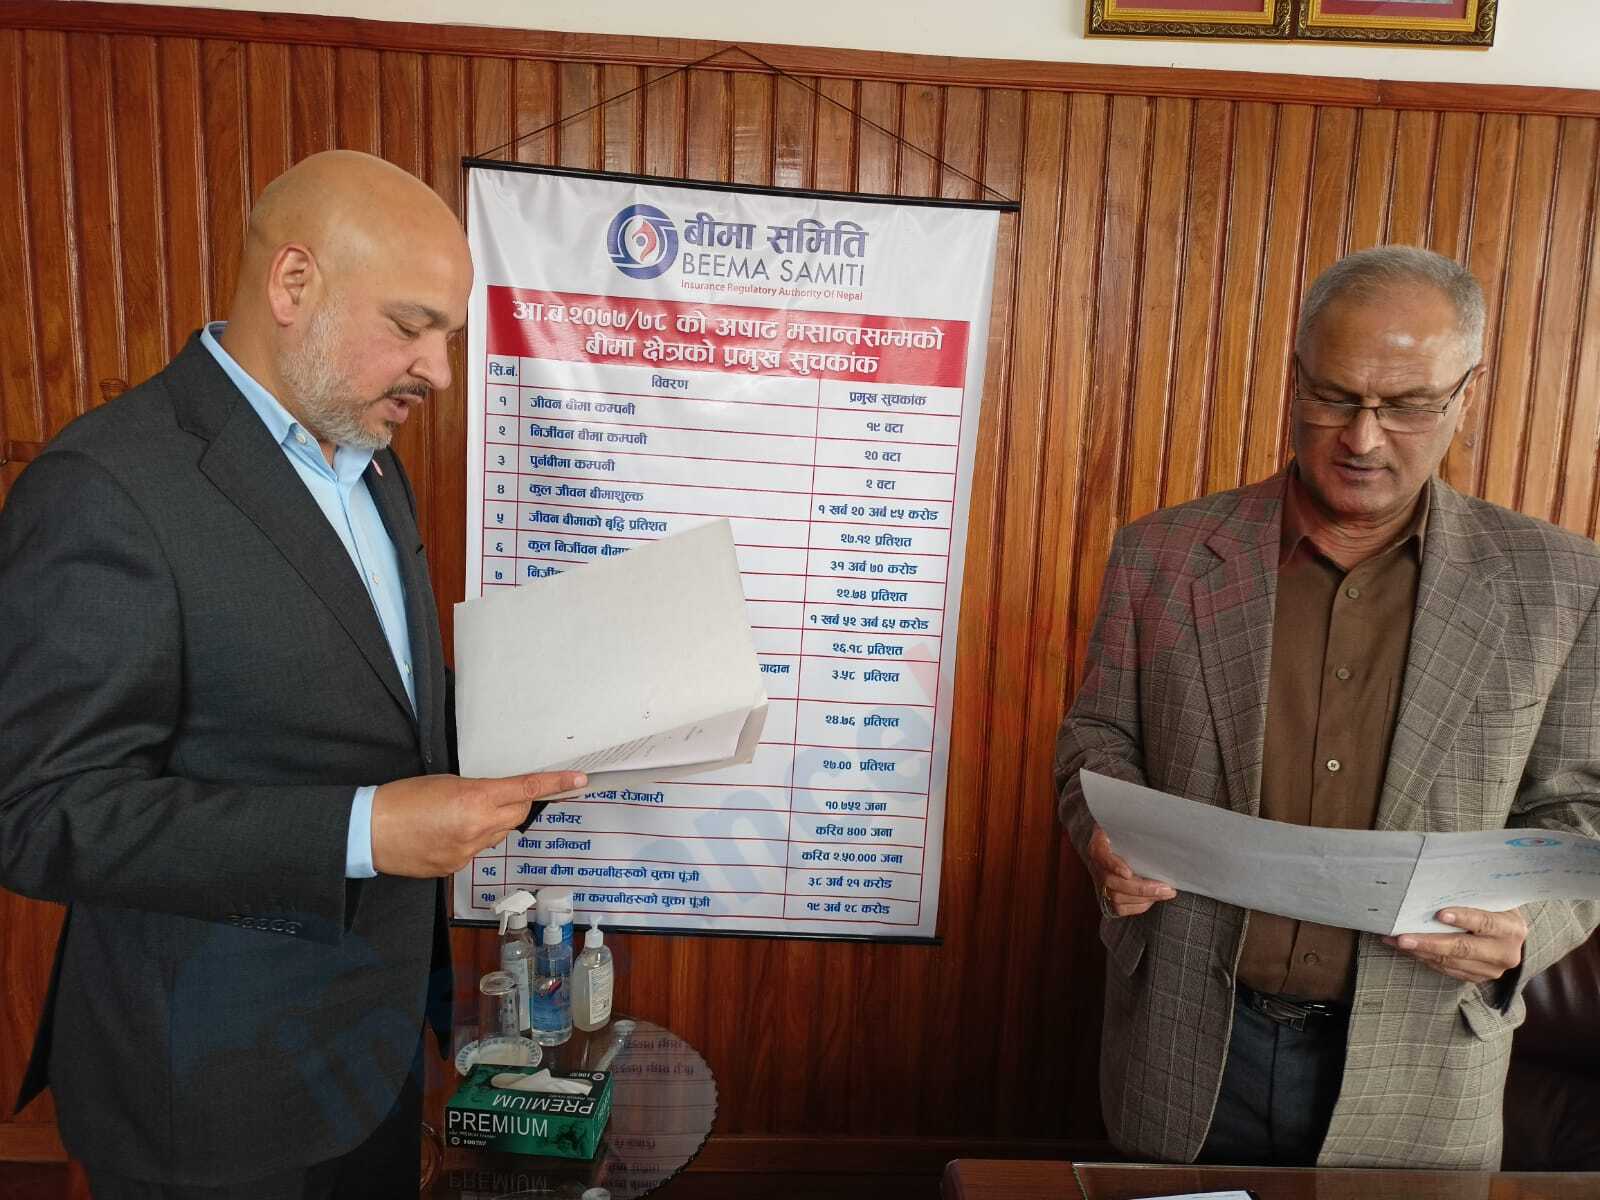 Himalayan Re’s Newly Elected Chairman Golcha Takes Oath